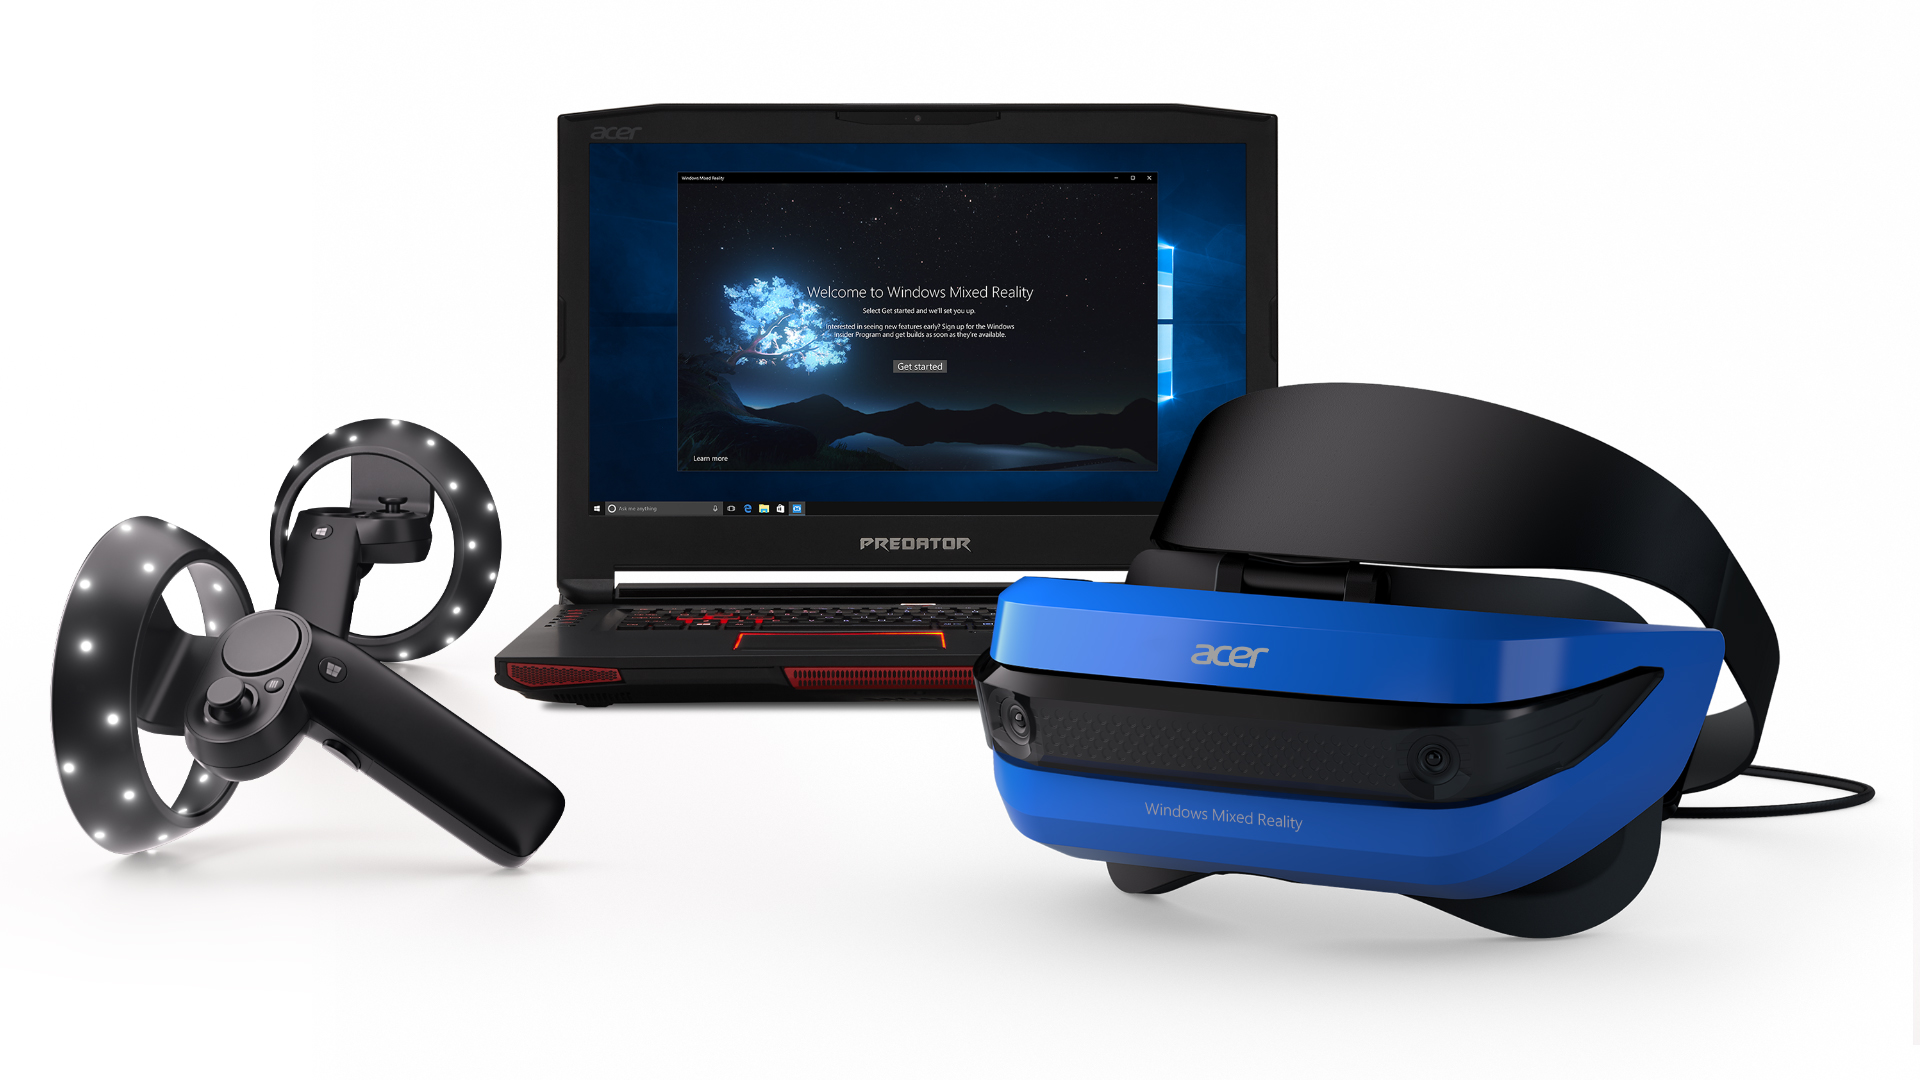 Windows Mixed Reality headset with motion controllers